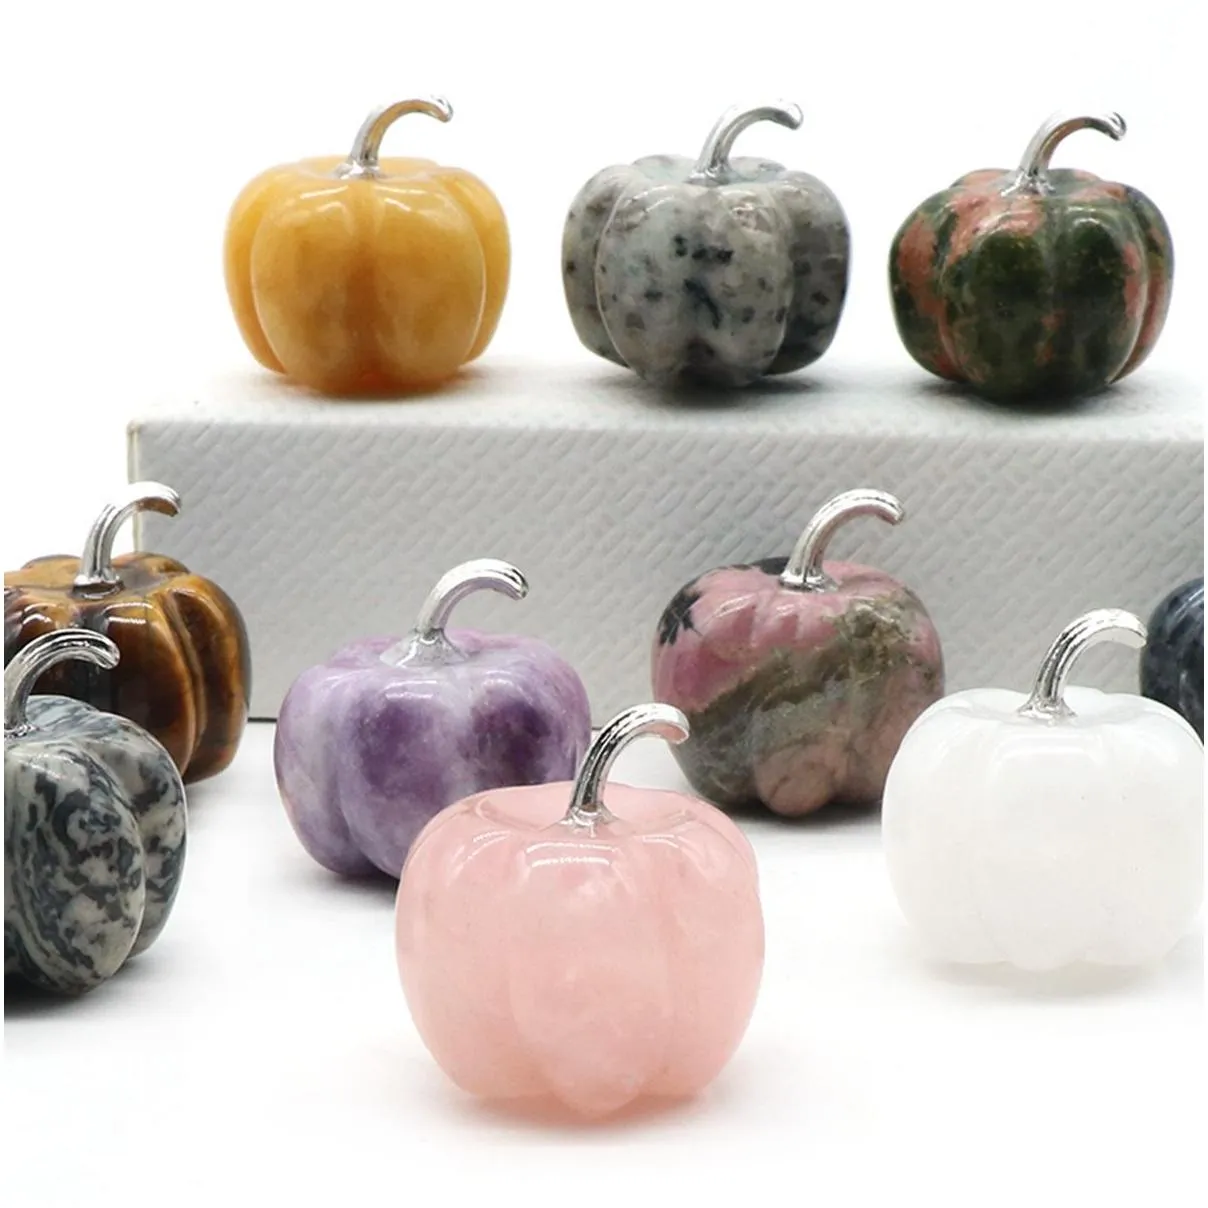 30mm Healing Pumpkin Stones Natural Crystal Hand Made Carving Pumpkin Shape Stone For Christmas Gifts